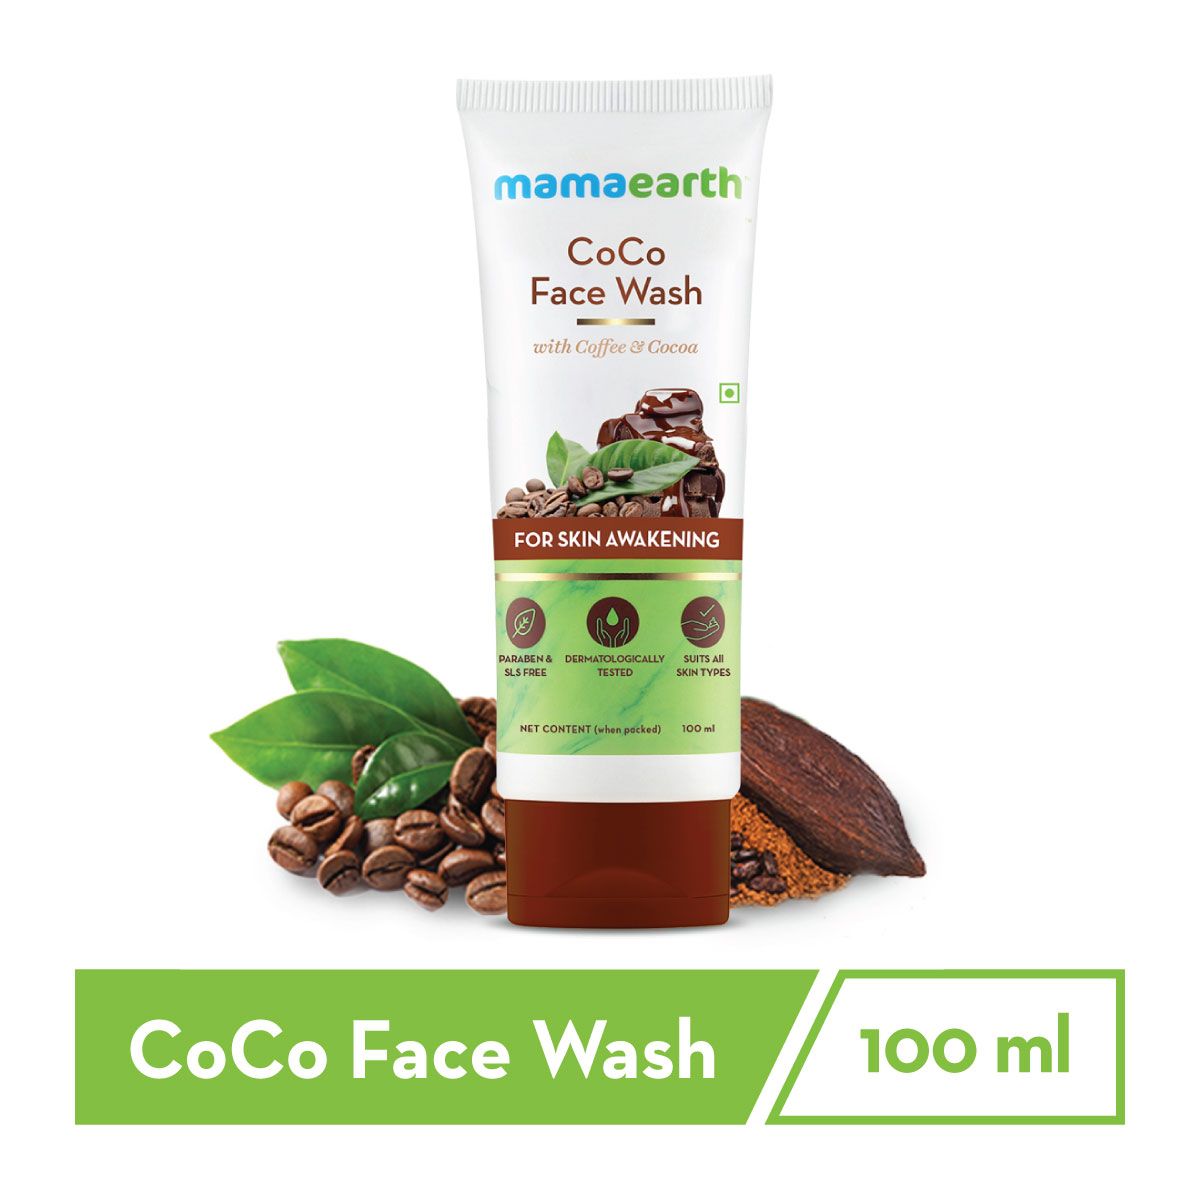 Mamaearth CoCo Face Wash Better Than Others Available In The Market